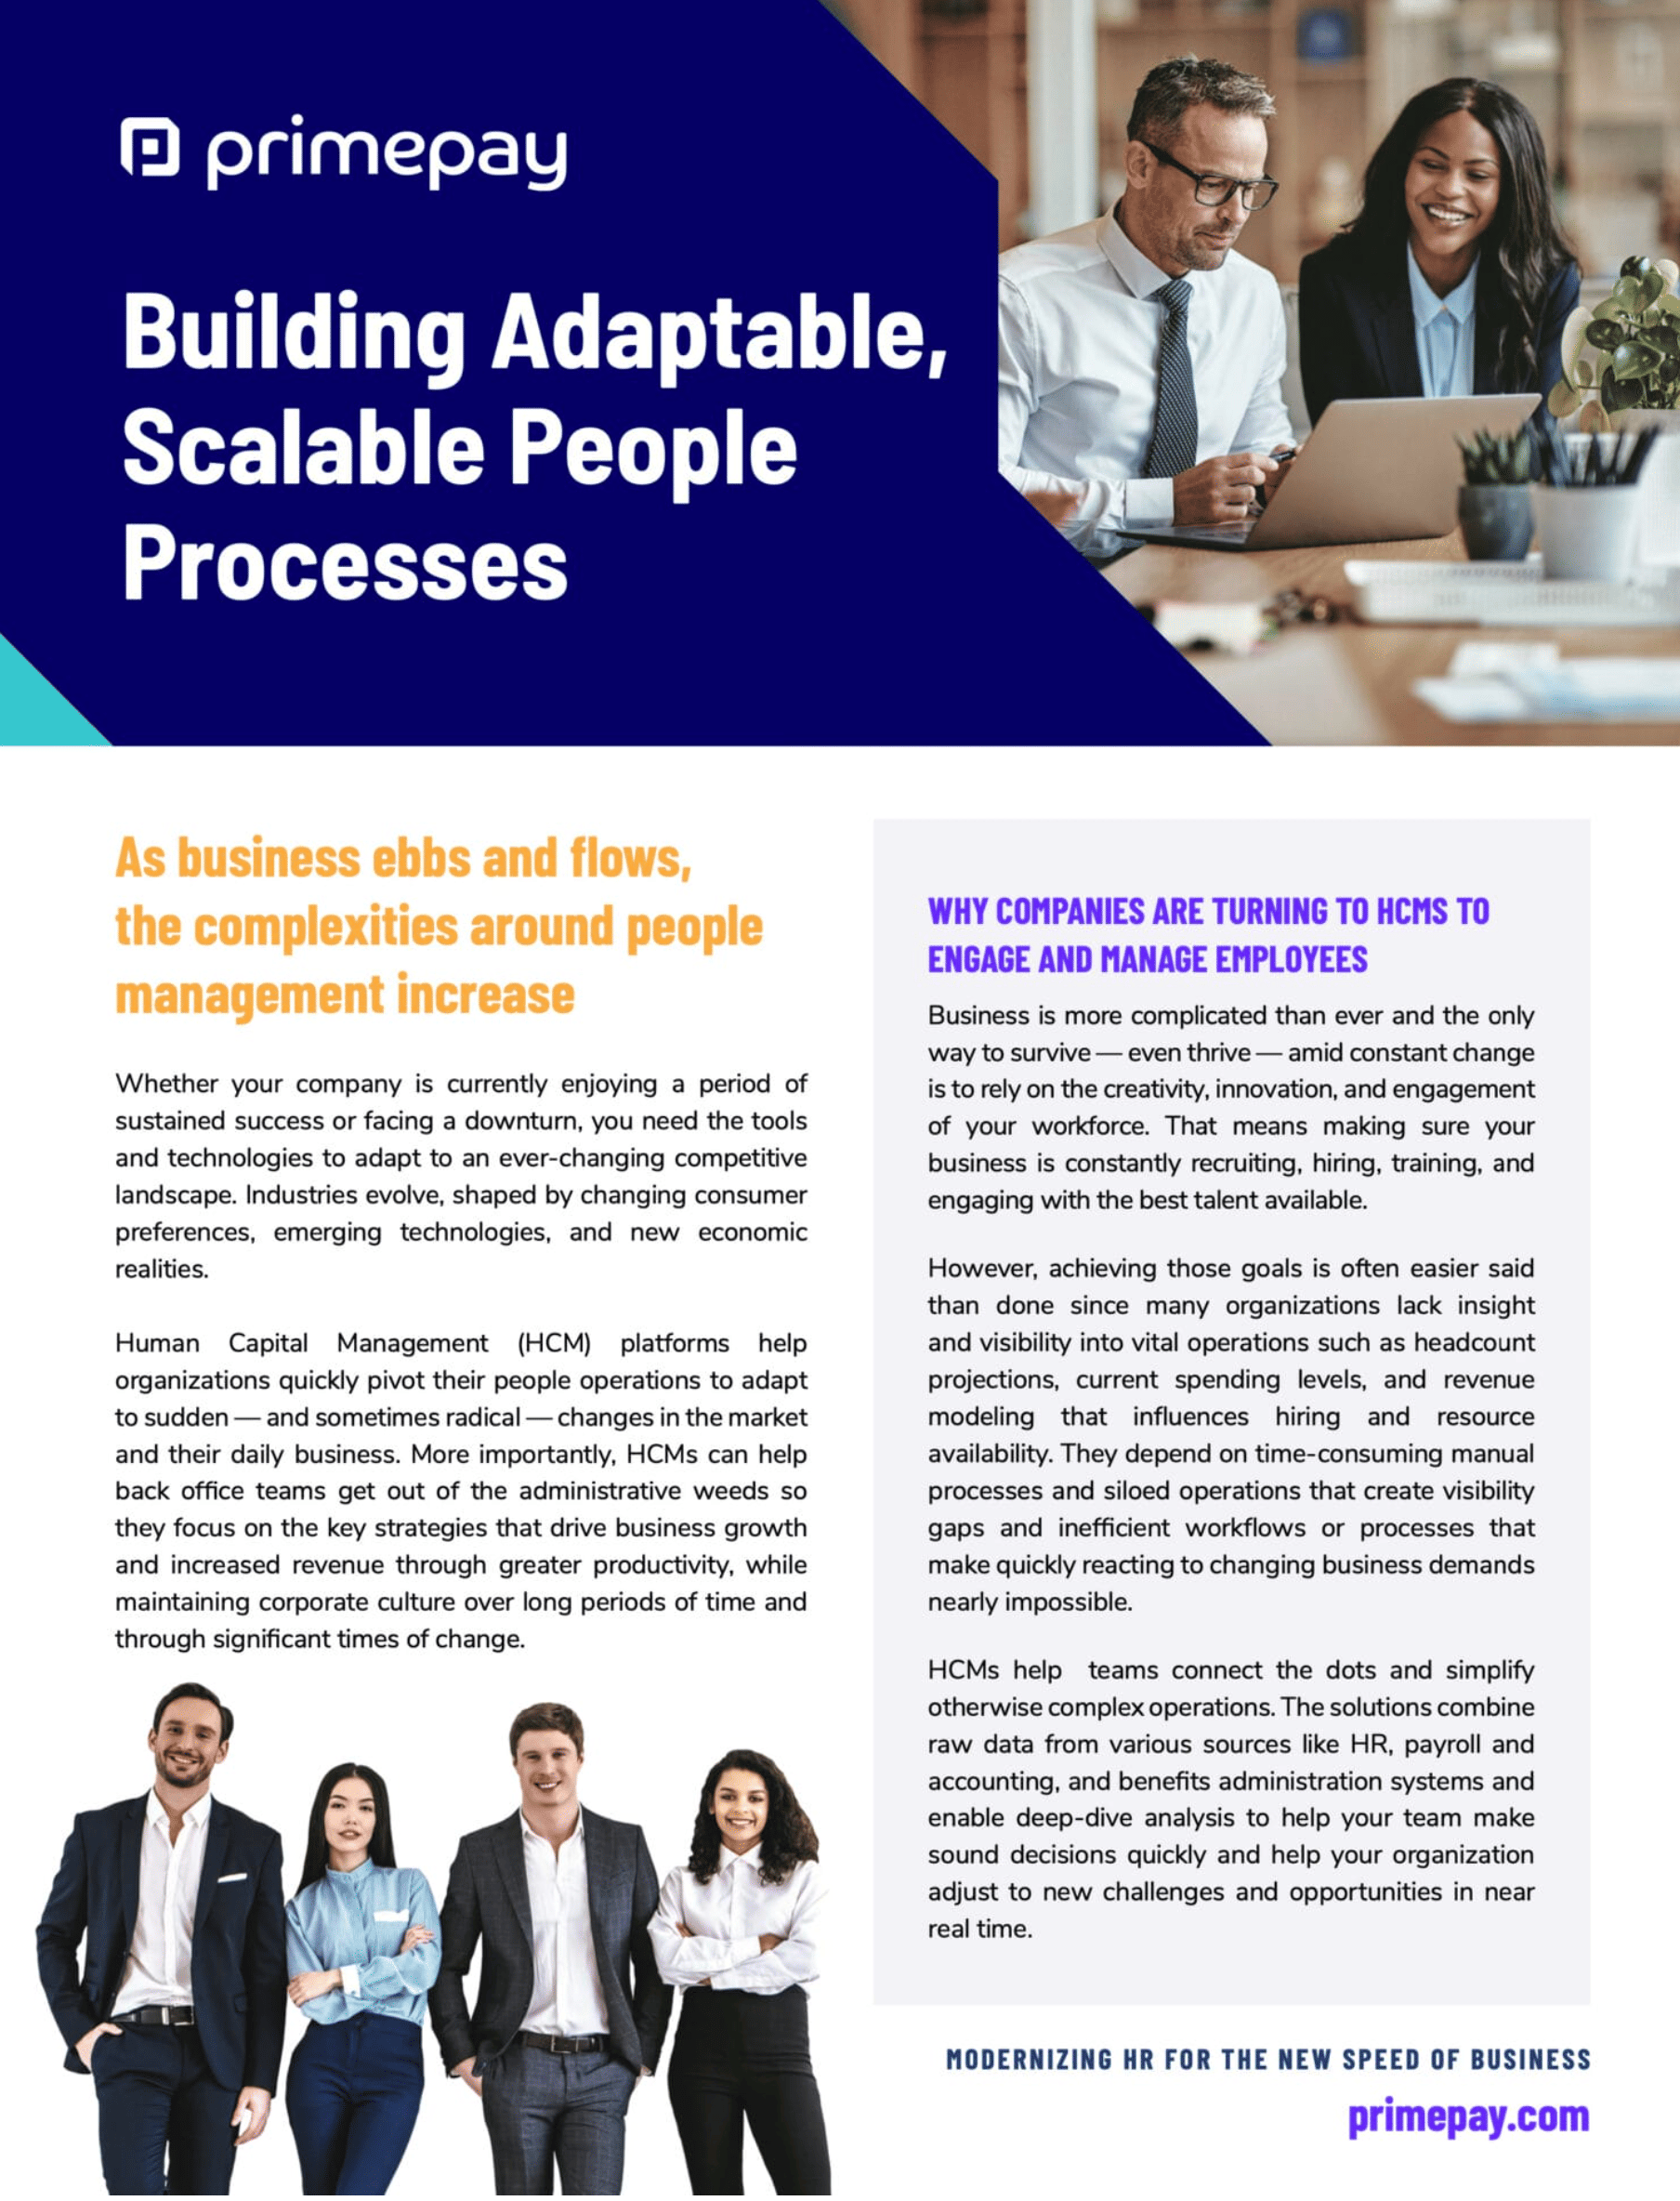 Building Adaptable & Scalable People Processes white paper cover image.